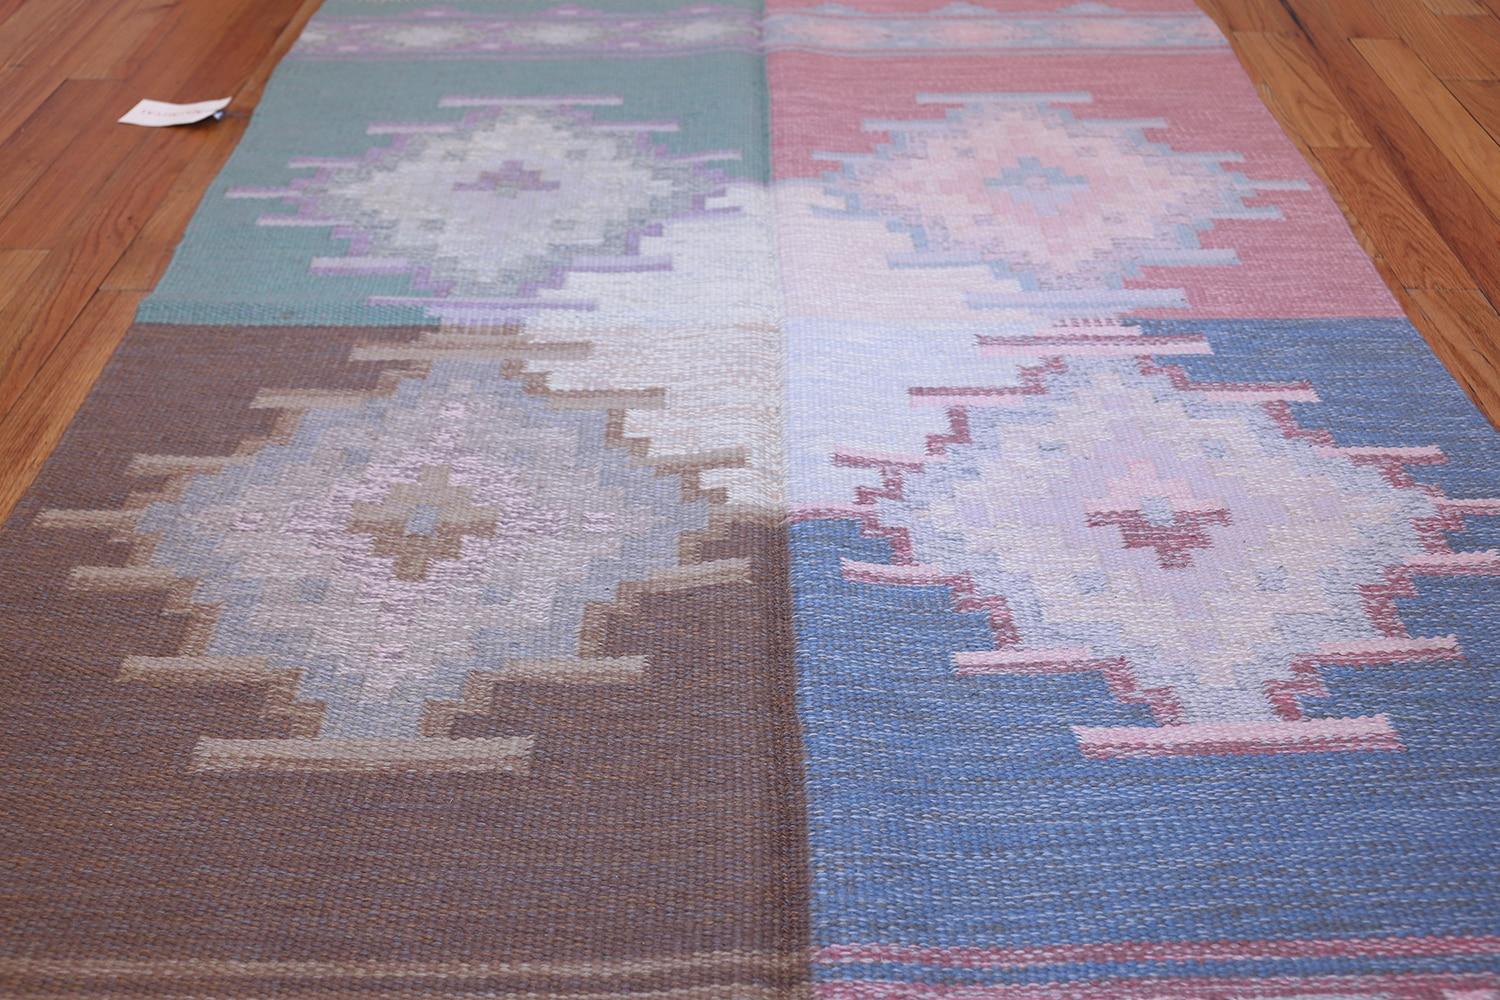 20th Century Vintage Swedish Flat-Woven Kilim. Size: 4 ft 5 in x 6 ft 8 in (1.35 m x 2.03 m)